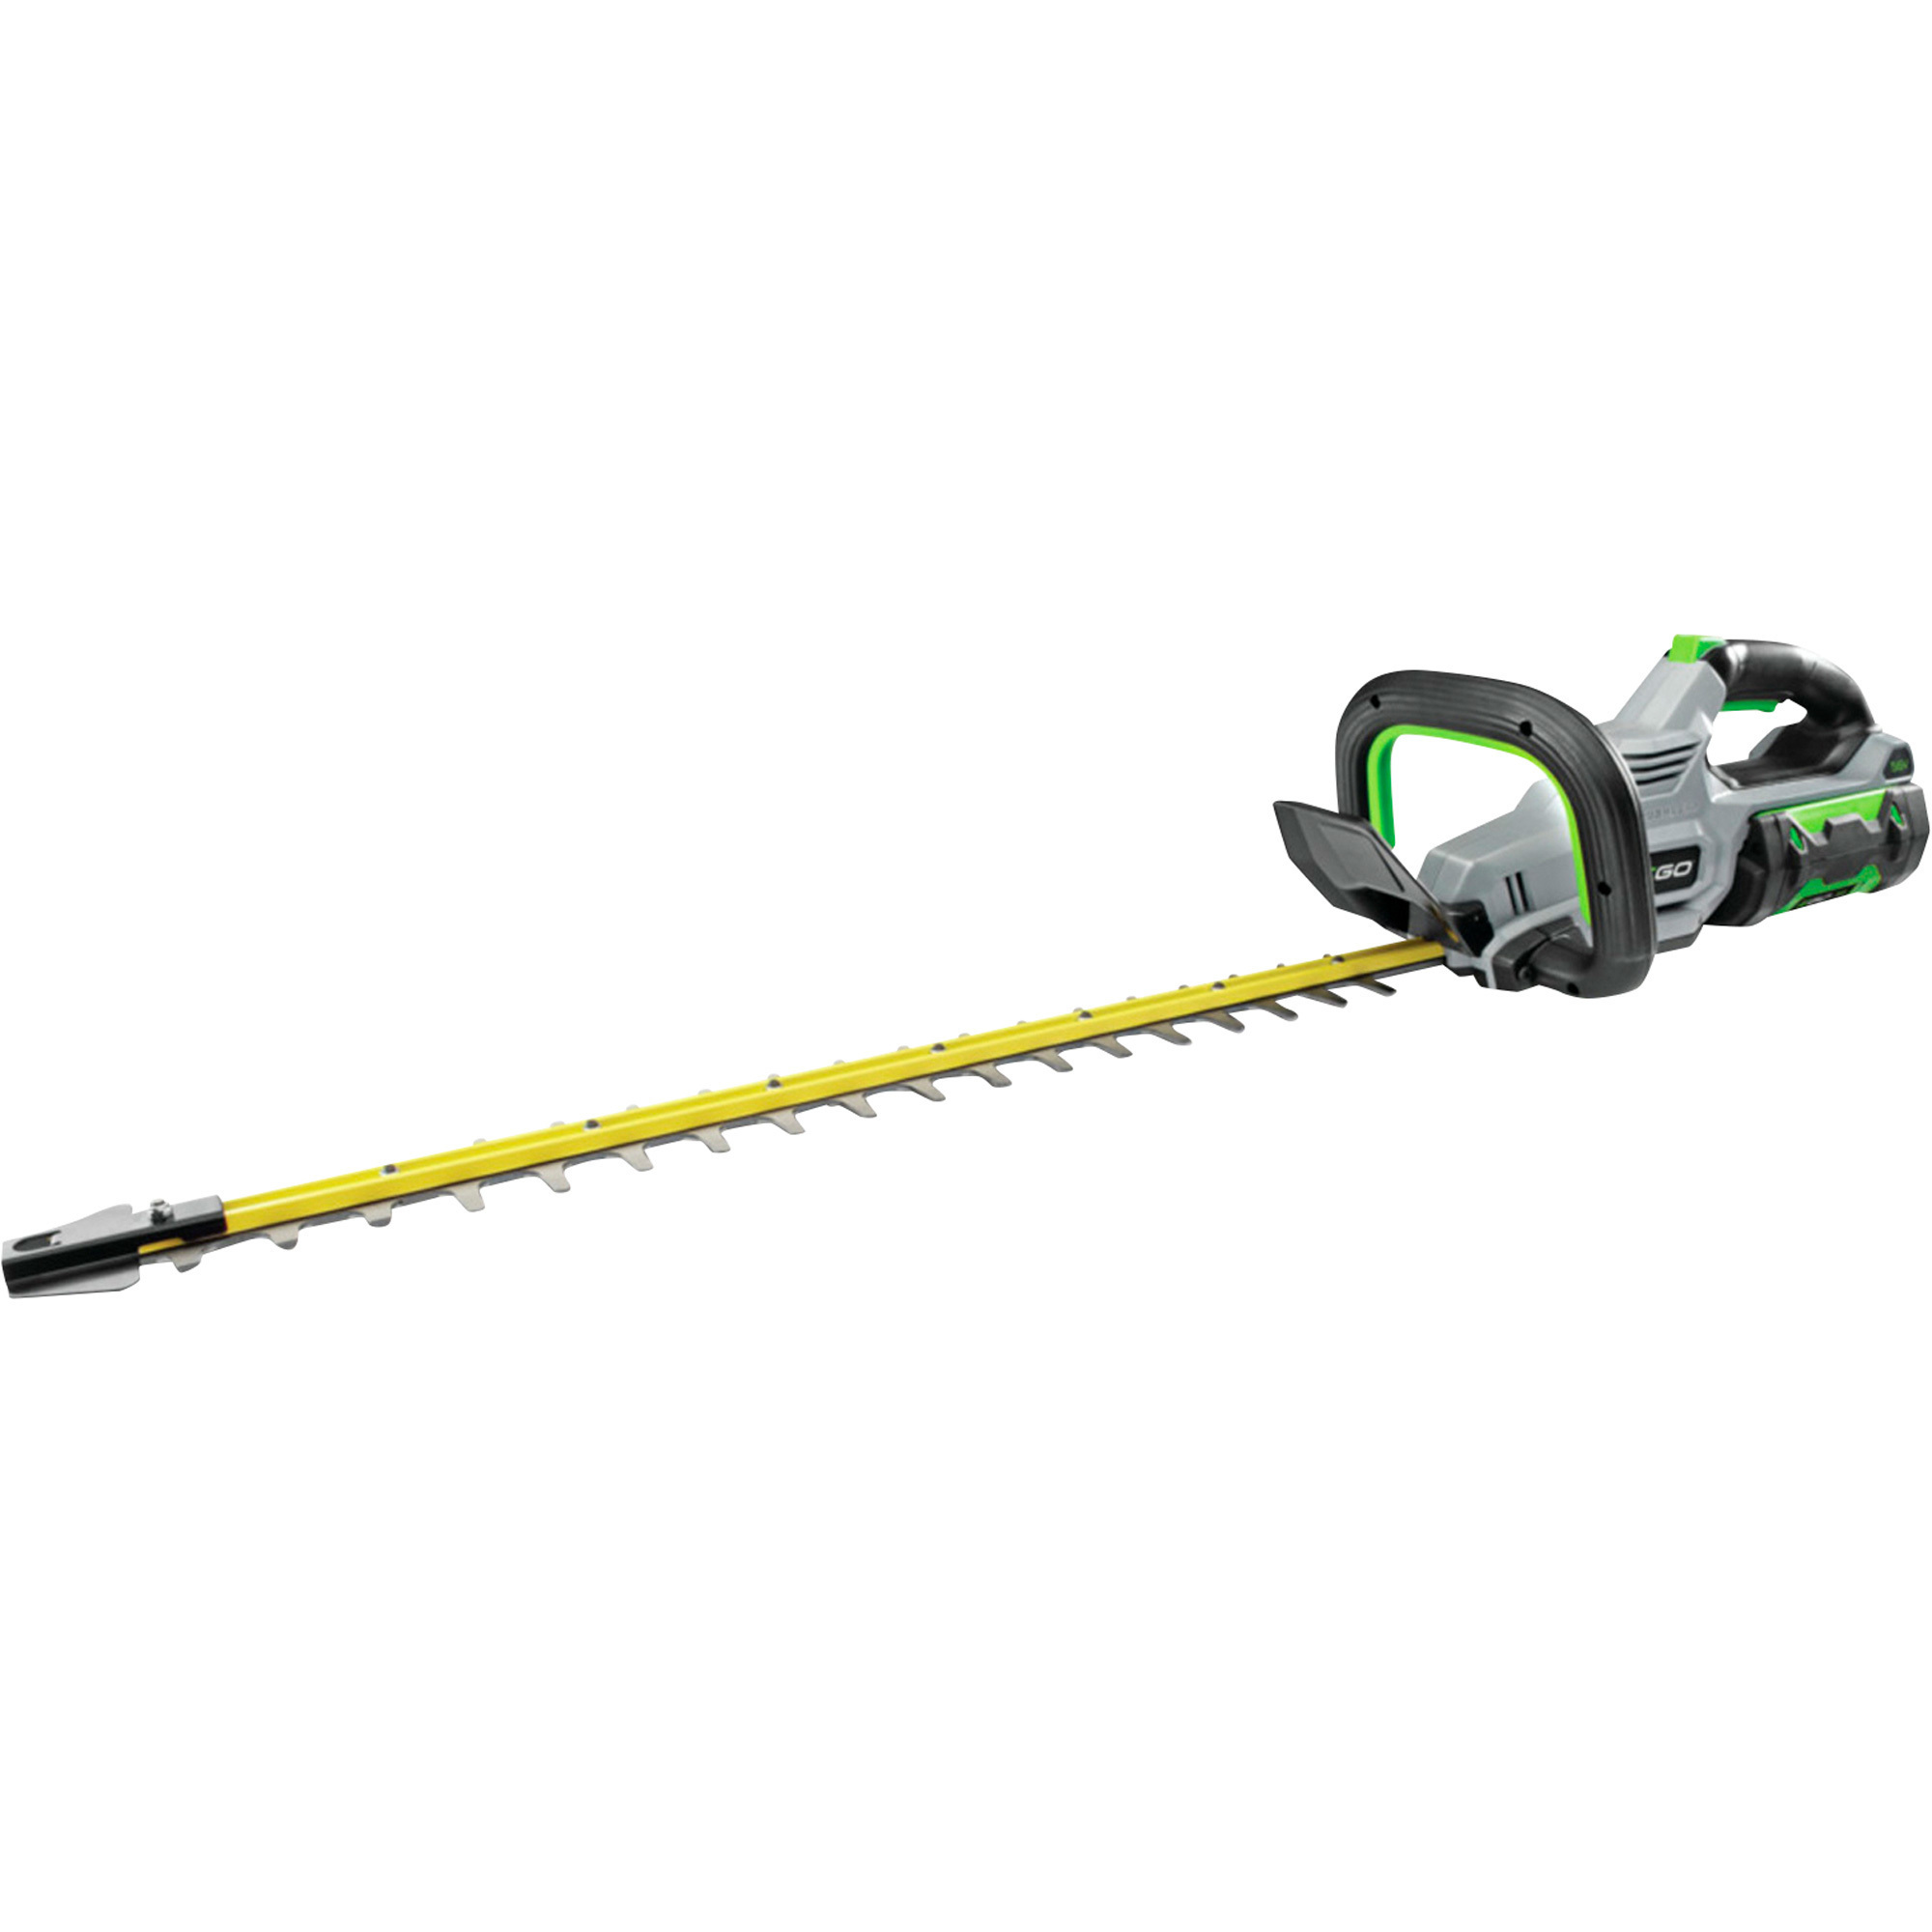 EGO Power+ Cordless Hedge Trimmer, 24Inch Blades, 2.5Ah Battery, Charger, Model HT2411